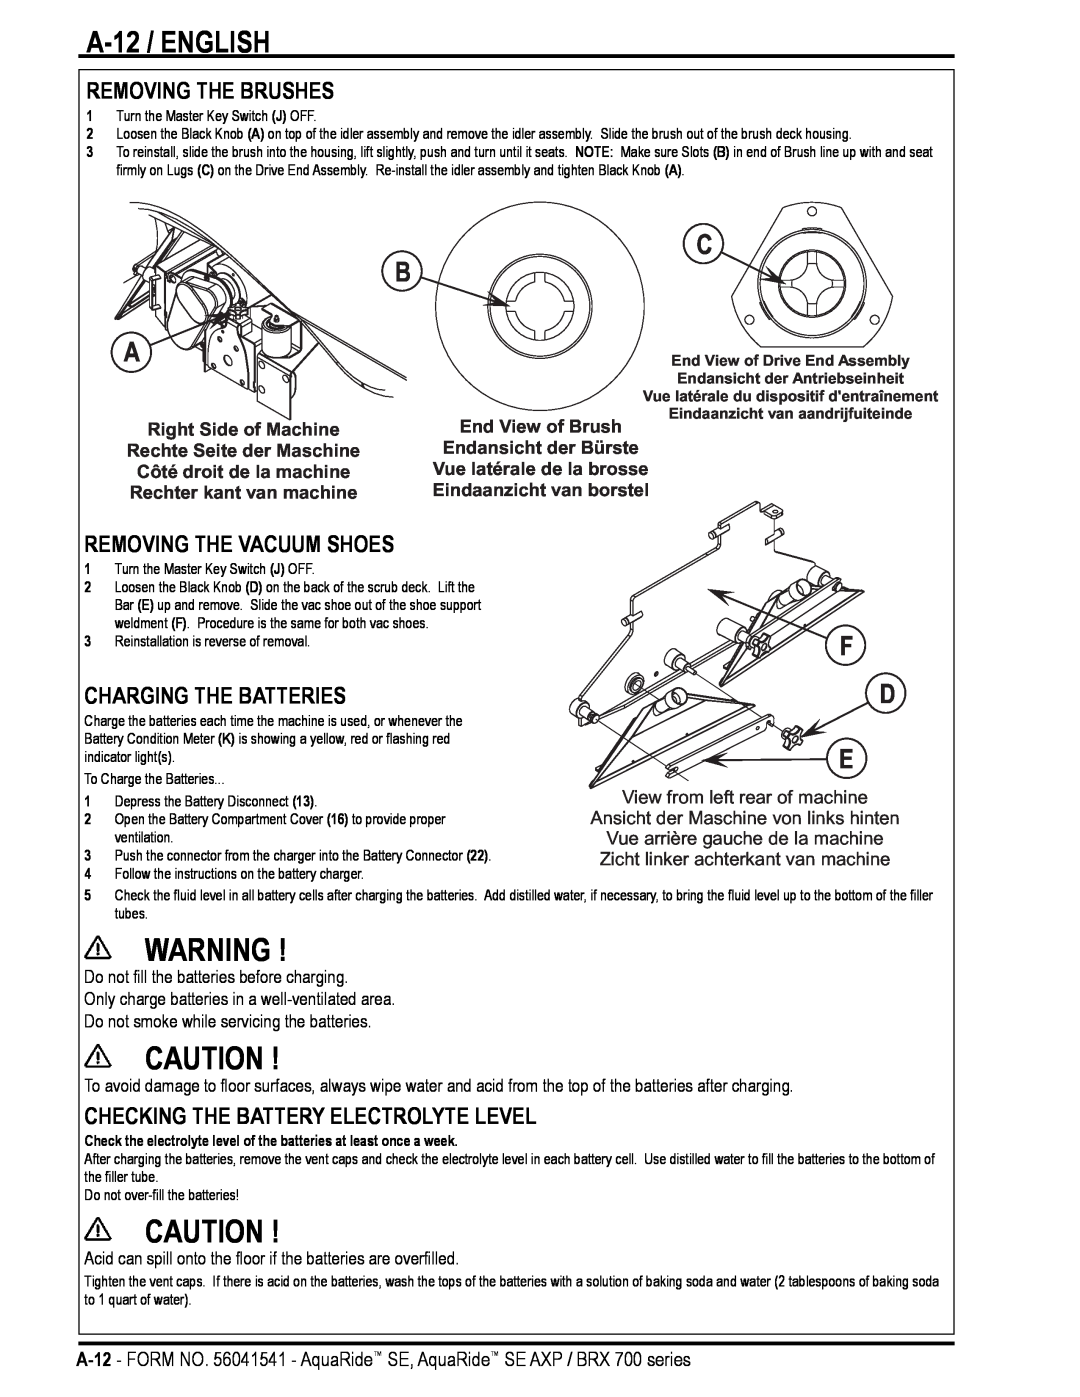 Nilfisk-Advance America BRX 700 Series manual A-12 / ENGLISH, Removing The Brushes, Removing The Vacuum Shoes 